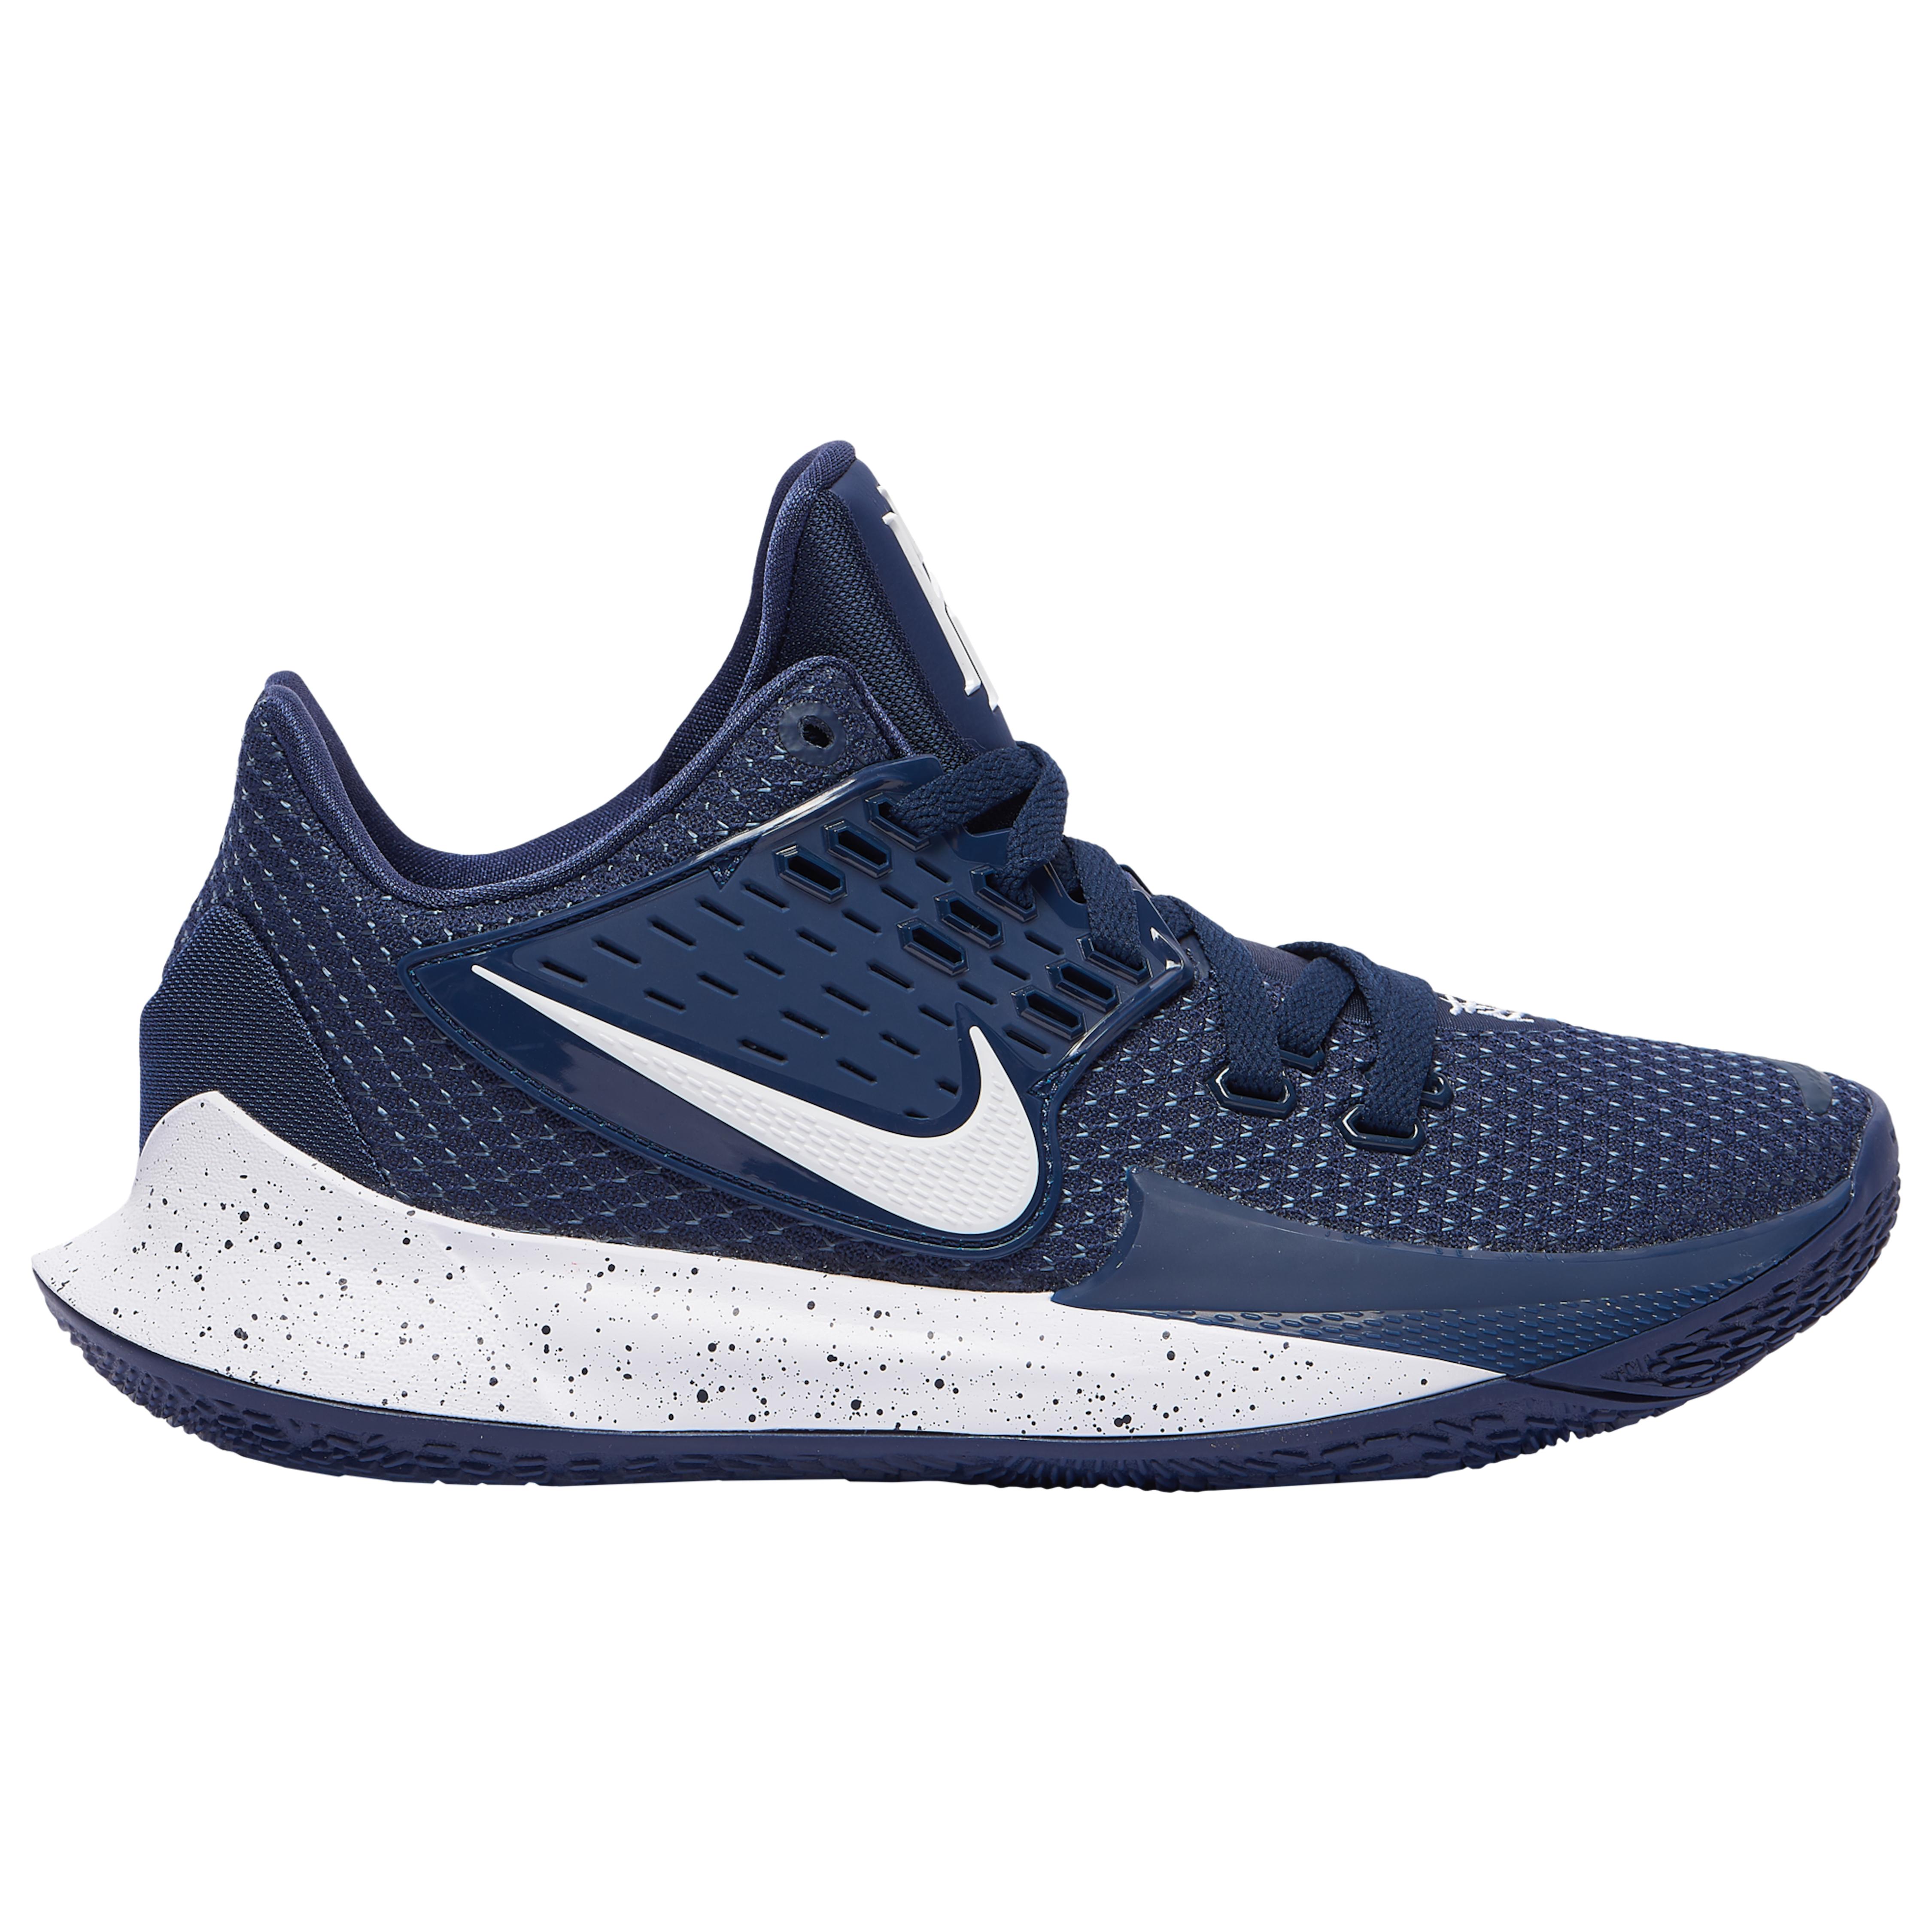 Nike Kyrie Low 2 in Midnight Navy/White 